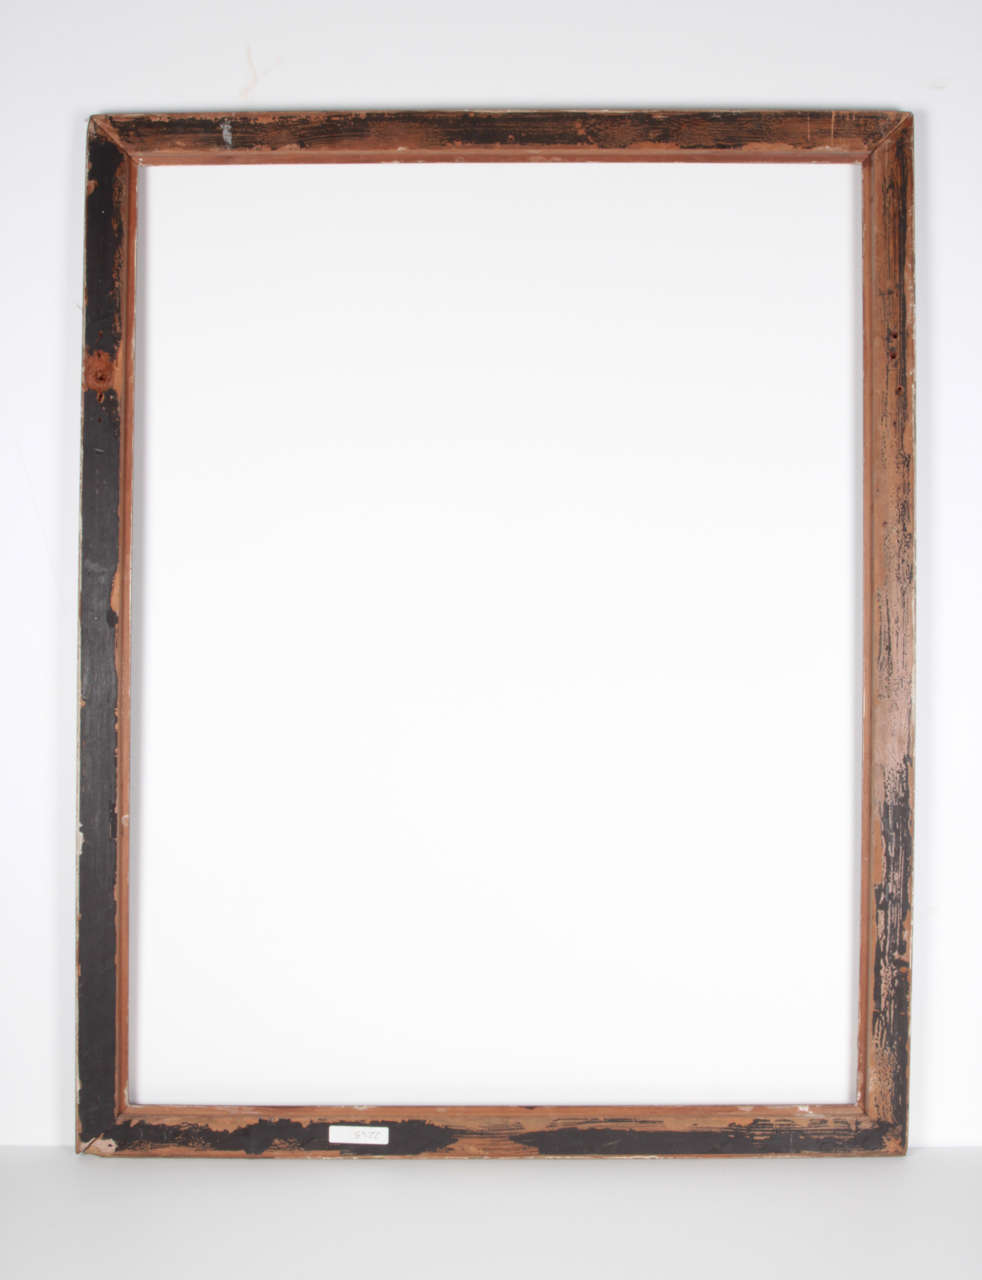 Carved and Gilded Arts & Crafts Era Frame, by Foster Bros. In Excellent Condition For Sale In New York, NY